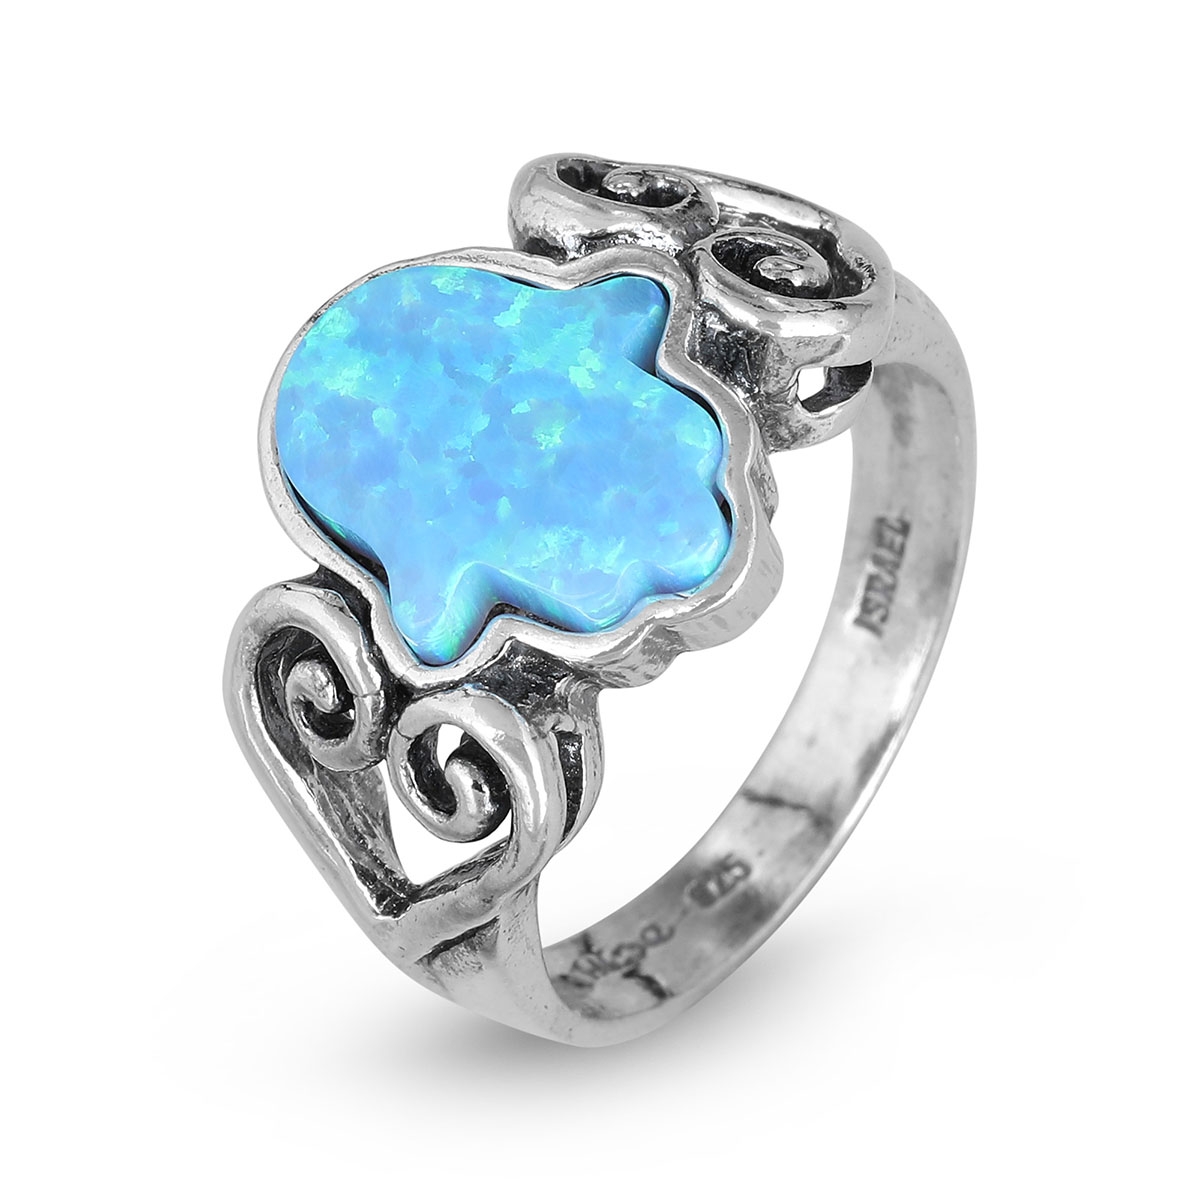 Sterling Silver and Opal Hamsa Ring With Heart Design - 1